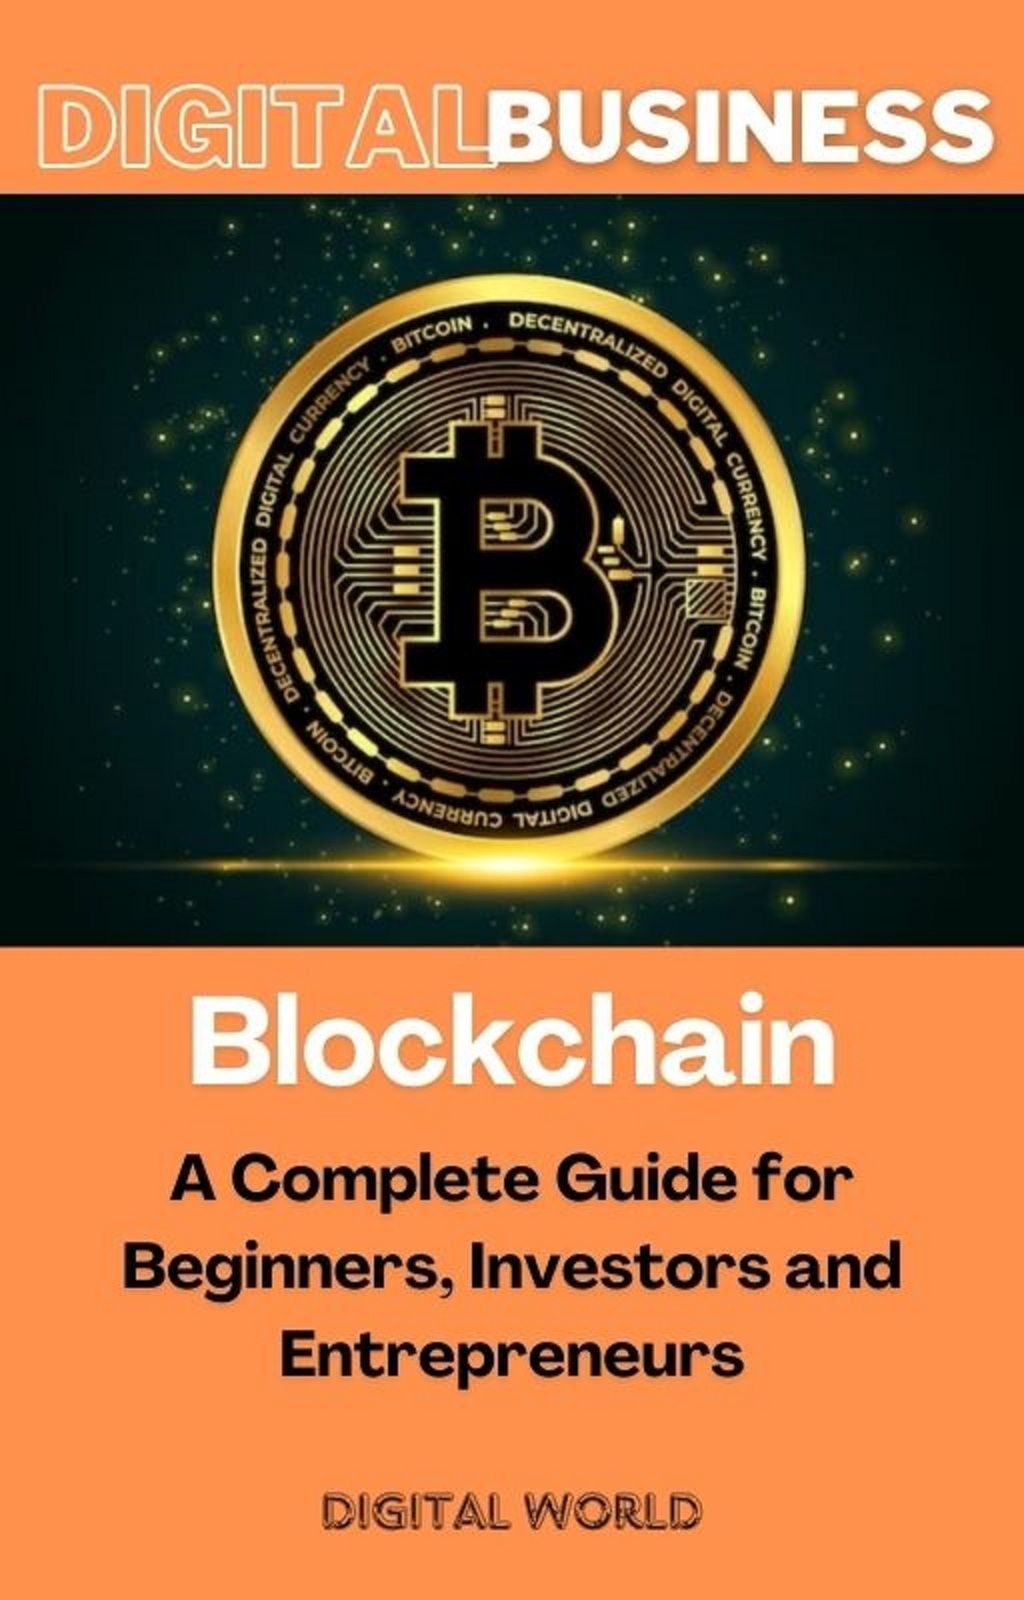 Blockchain - A Complete Guide for Beginners, Investors and Entrepreneurs